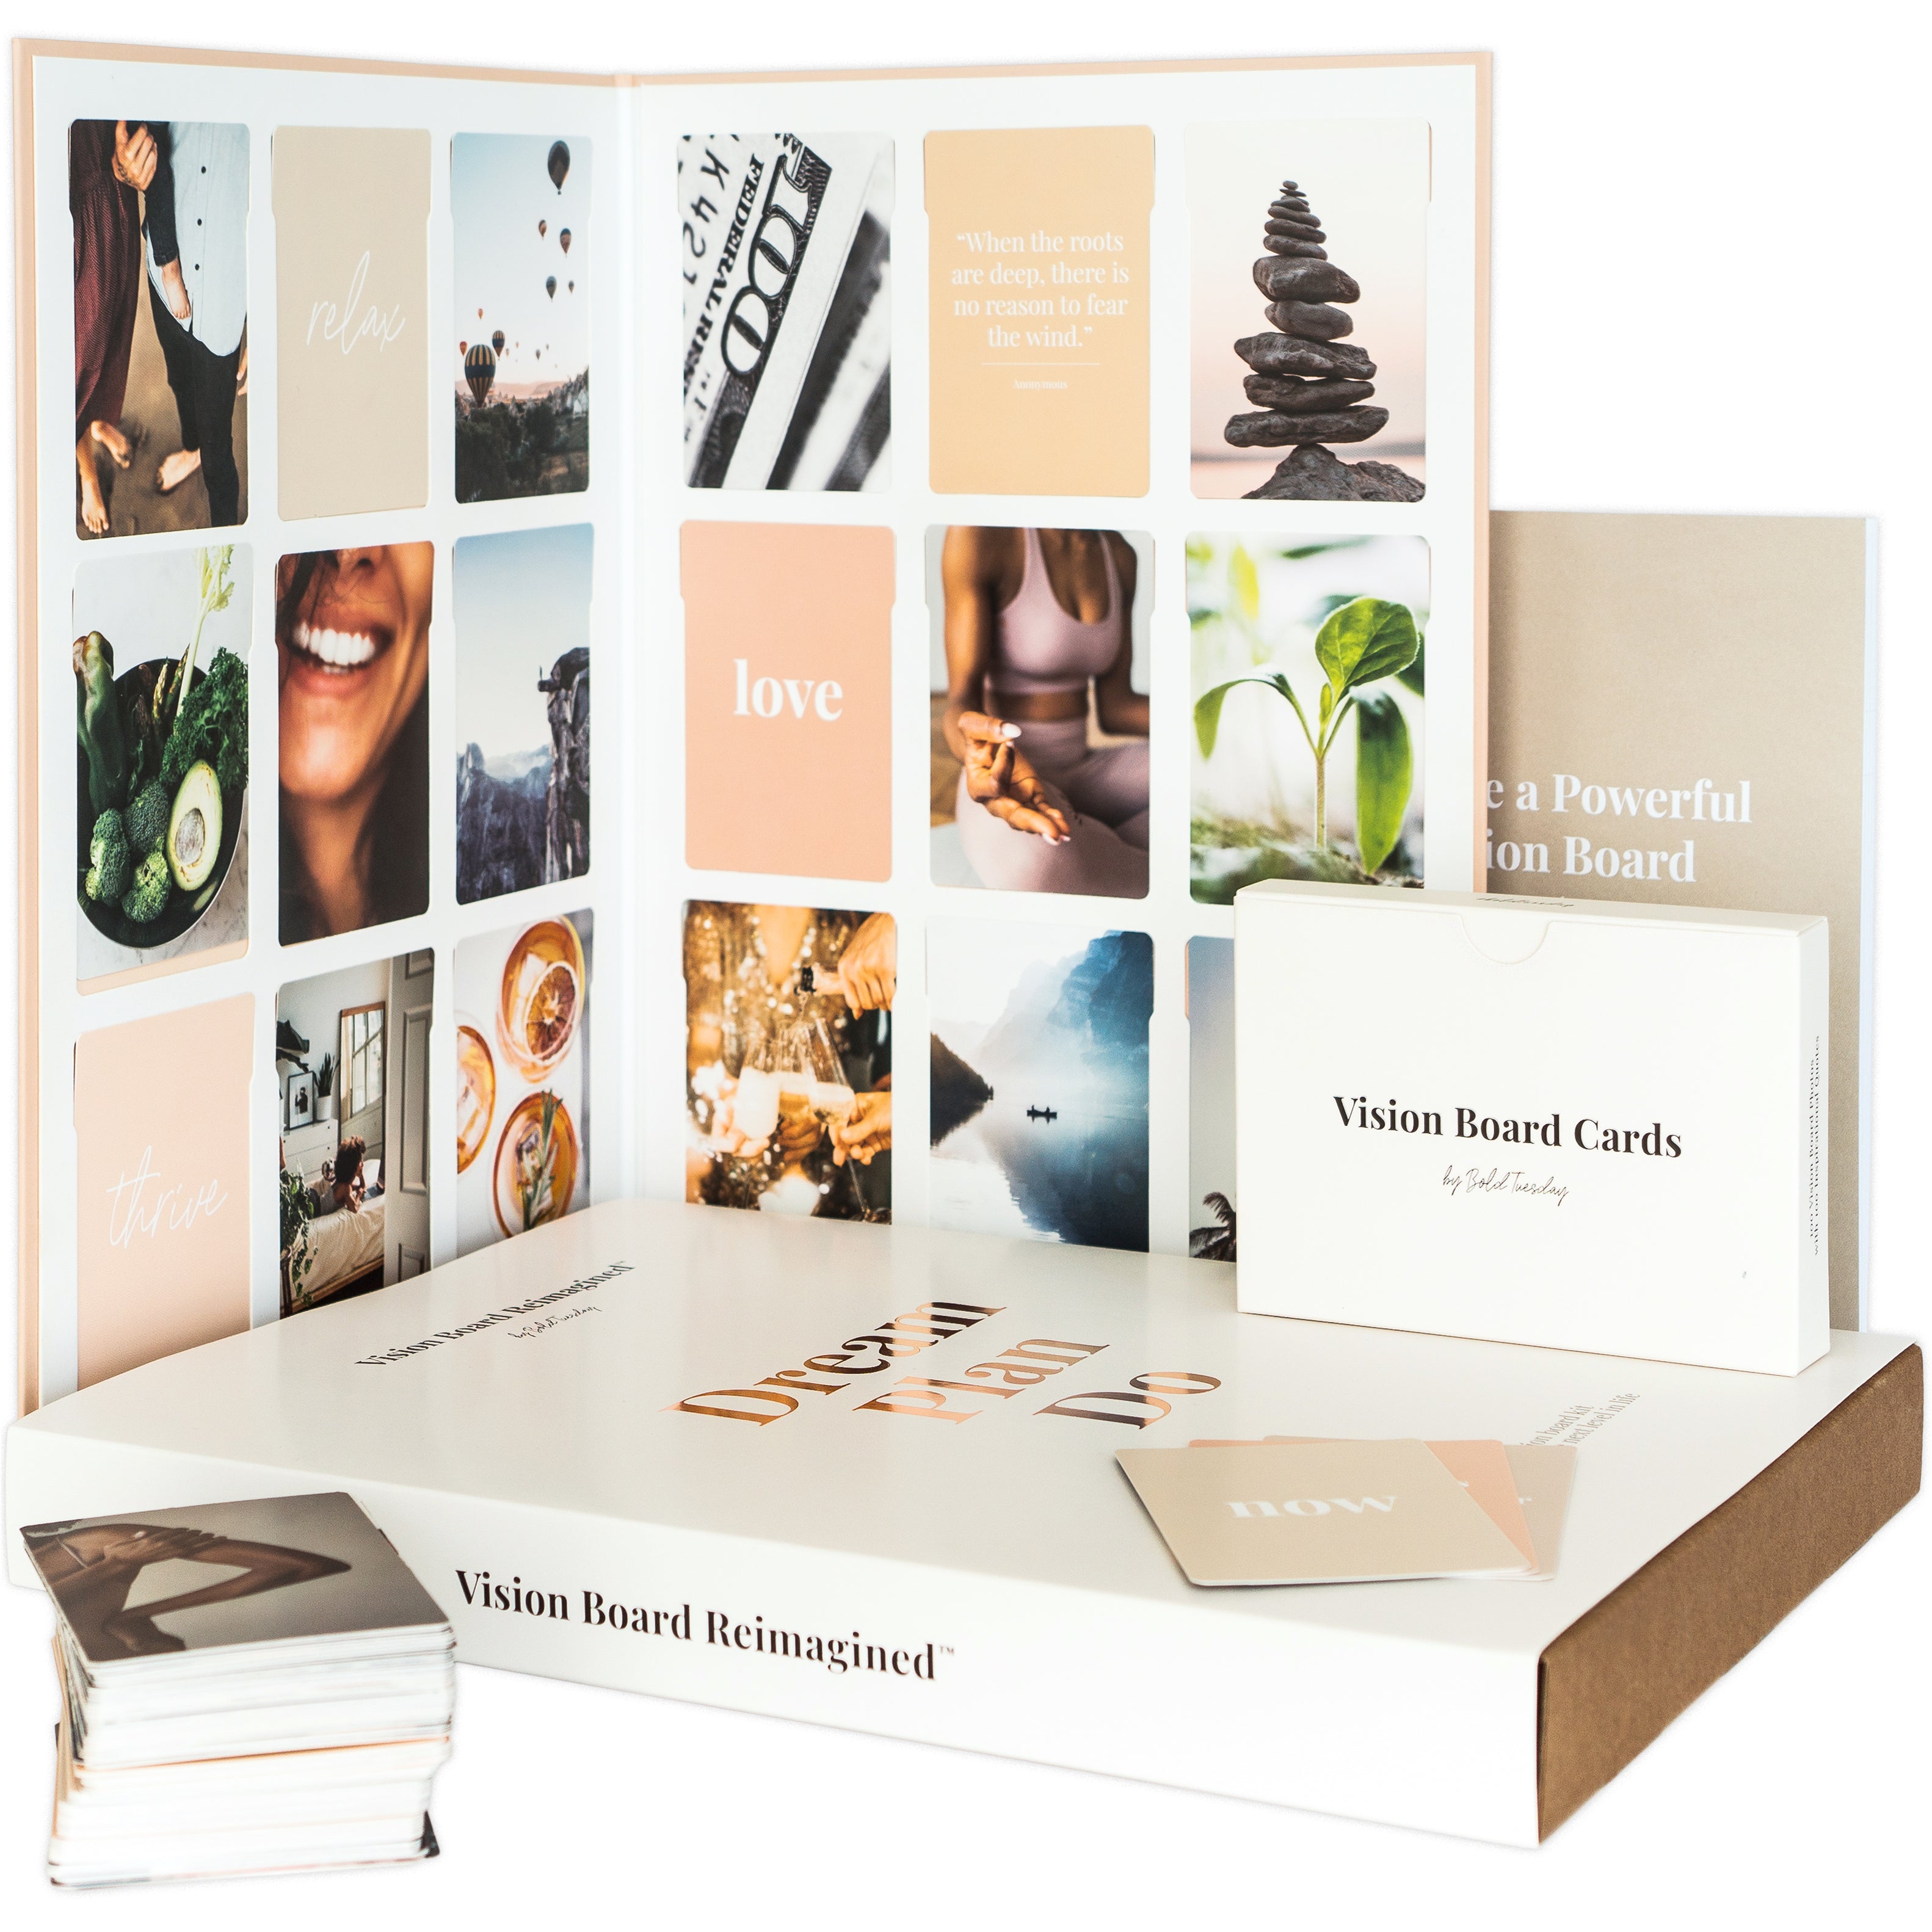 NEW! Limited Edition Vision Board Kits! + More - Goldmine And Coco